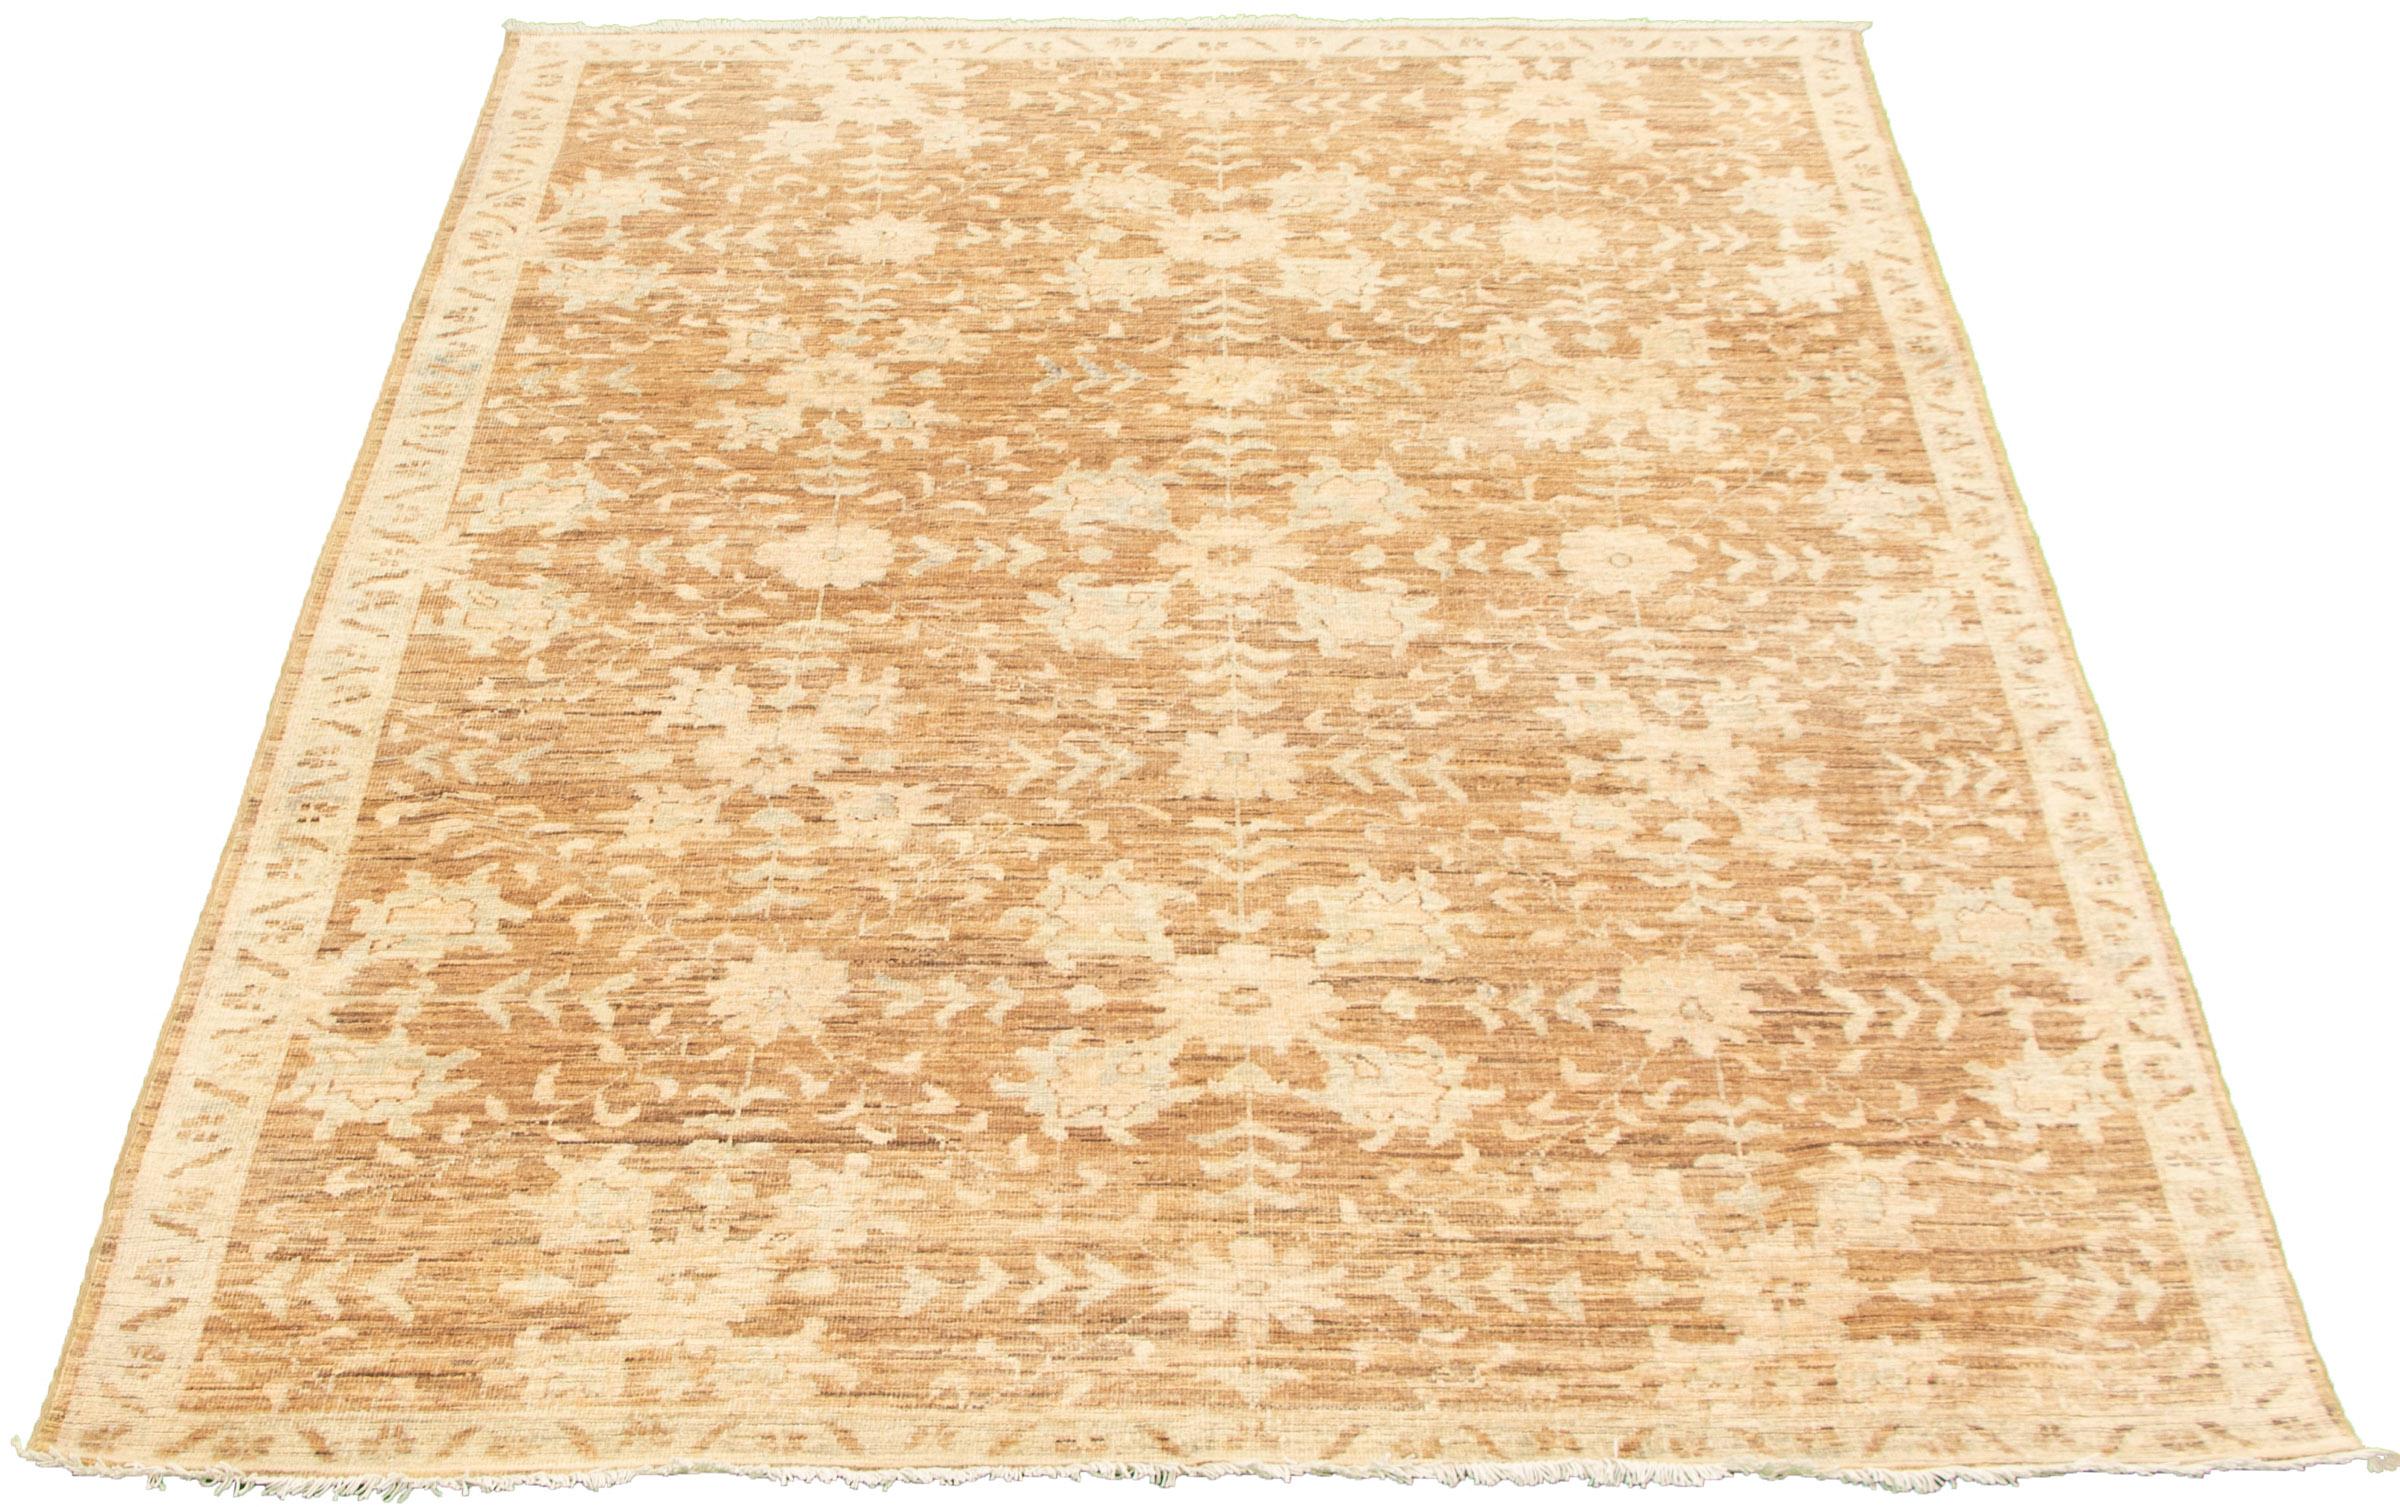 Hand-Woven Fine Transitional Neutral Wool Persian Oushak Carpet, Hand-Knotted, 6' x 9' For Sale